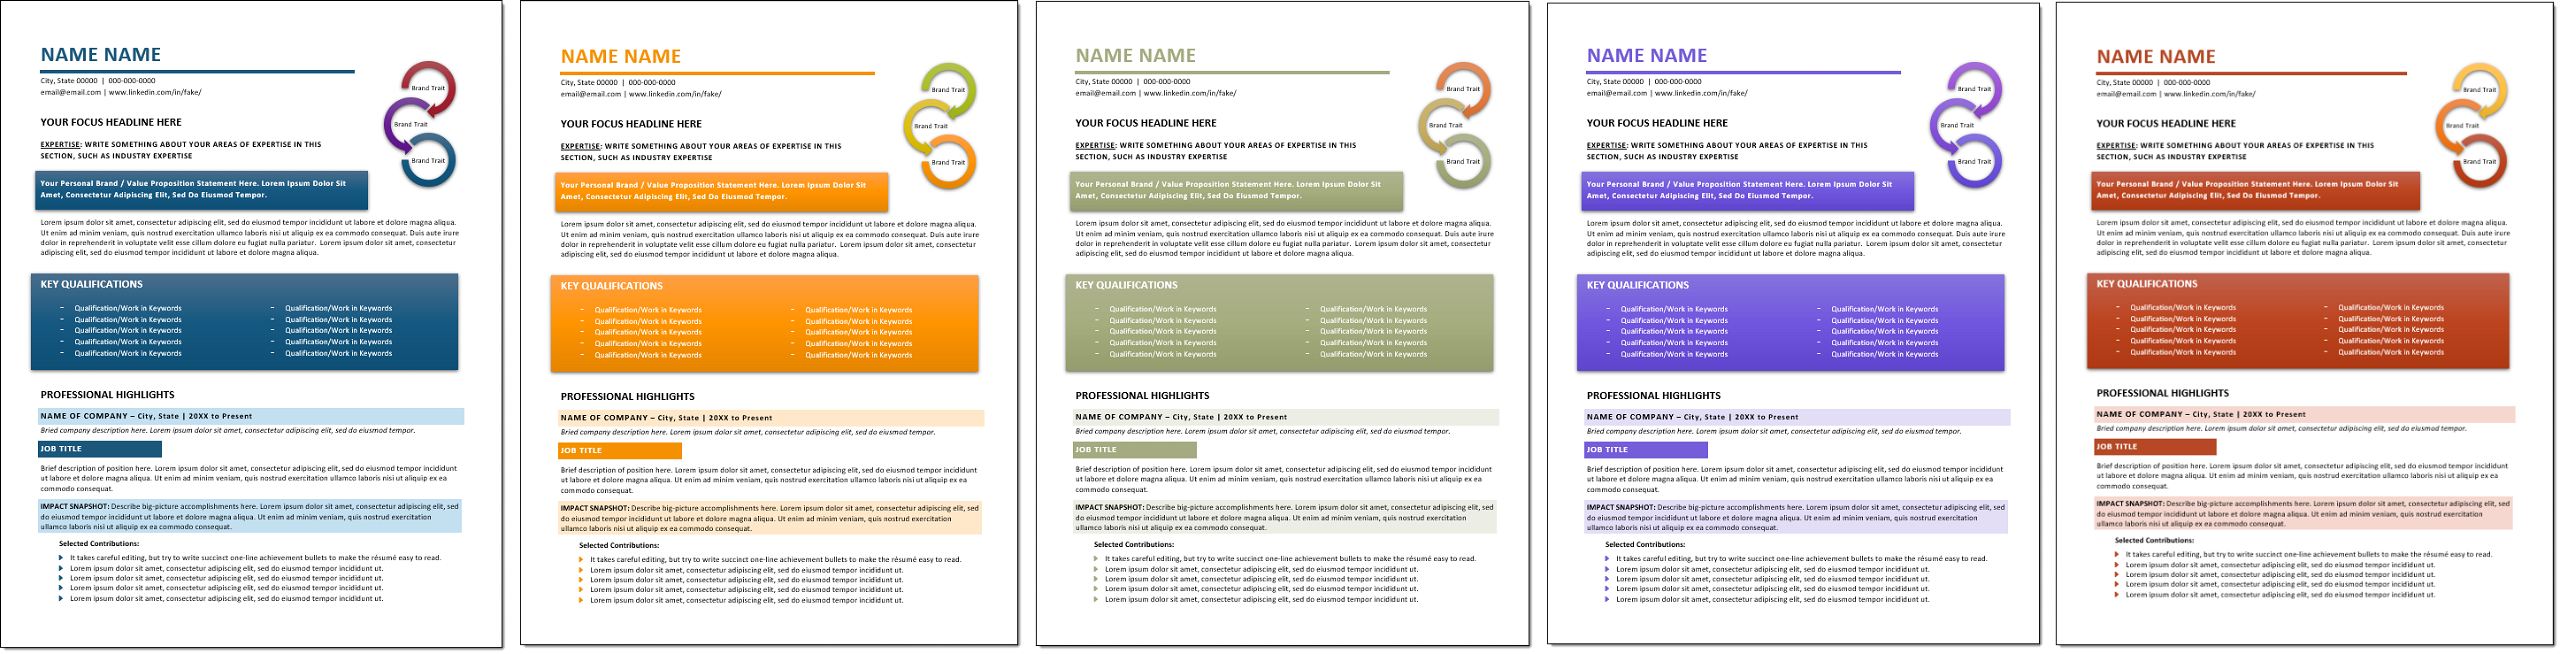 Sophisticated Resume Templates Change Colors